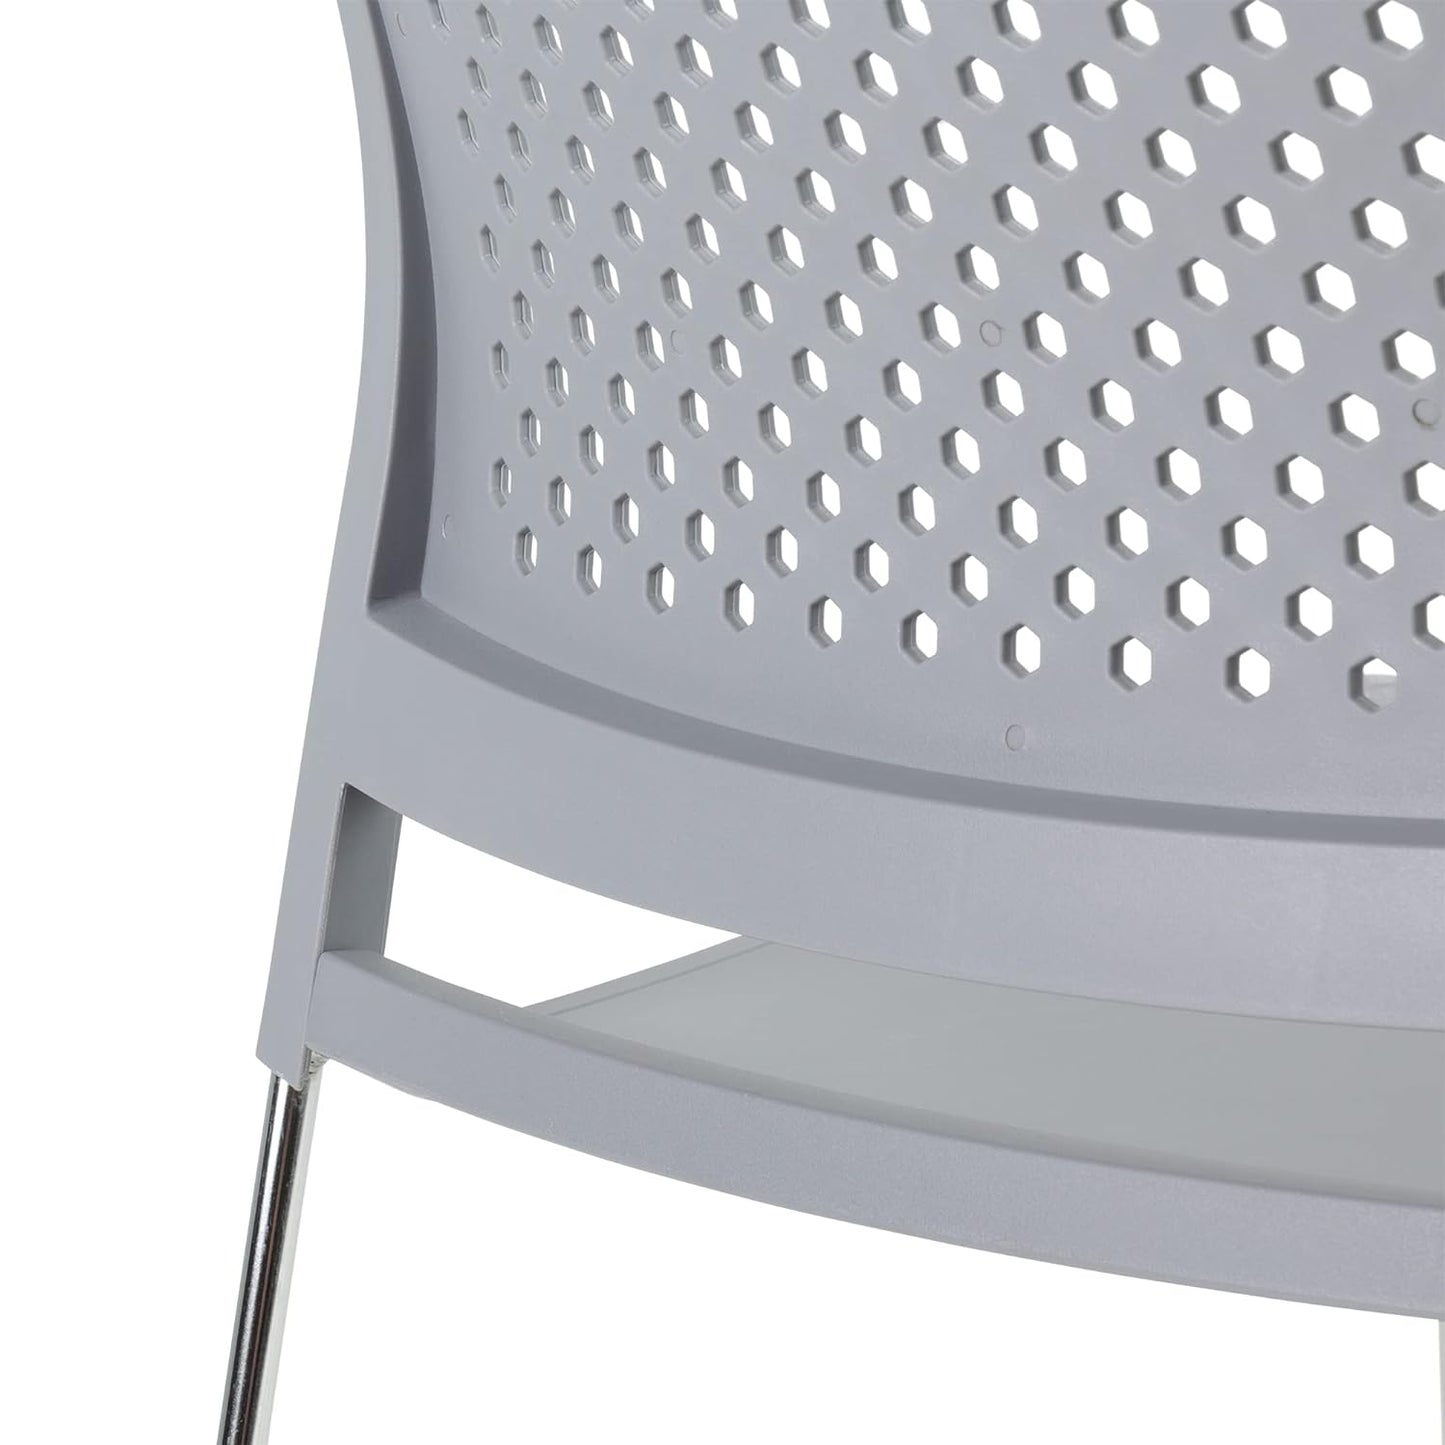 Chrome Sled Base Office Stack Chair with Perforated Seatback (Pack of 5), Gray